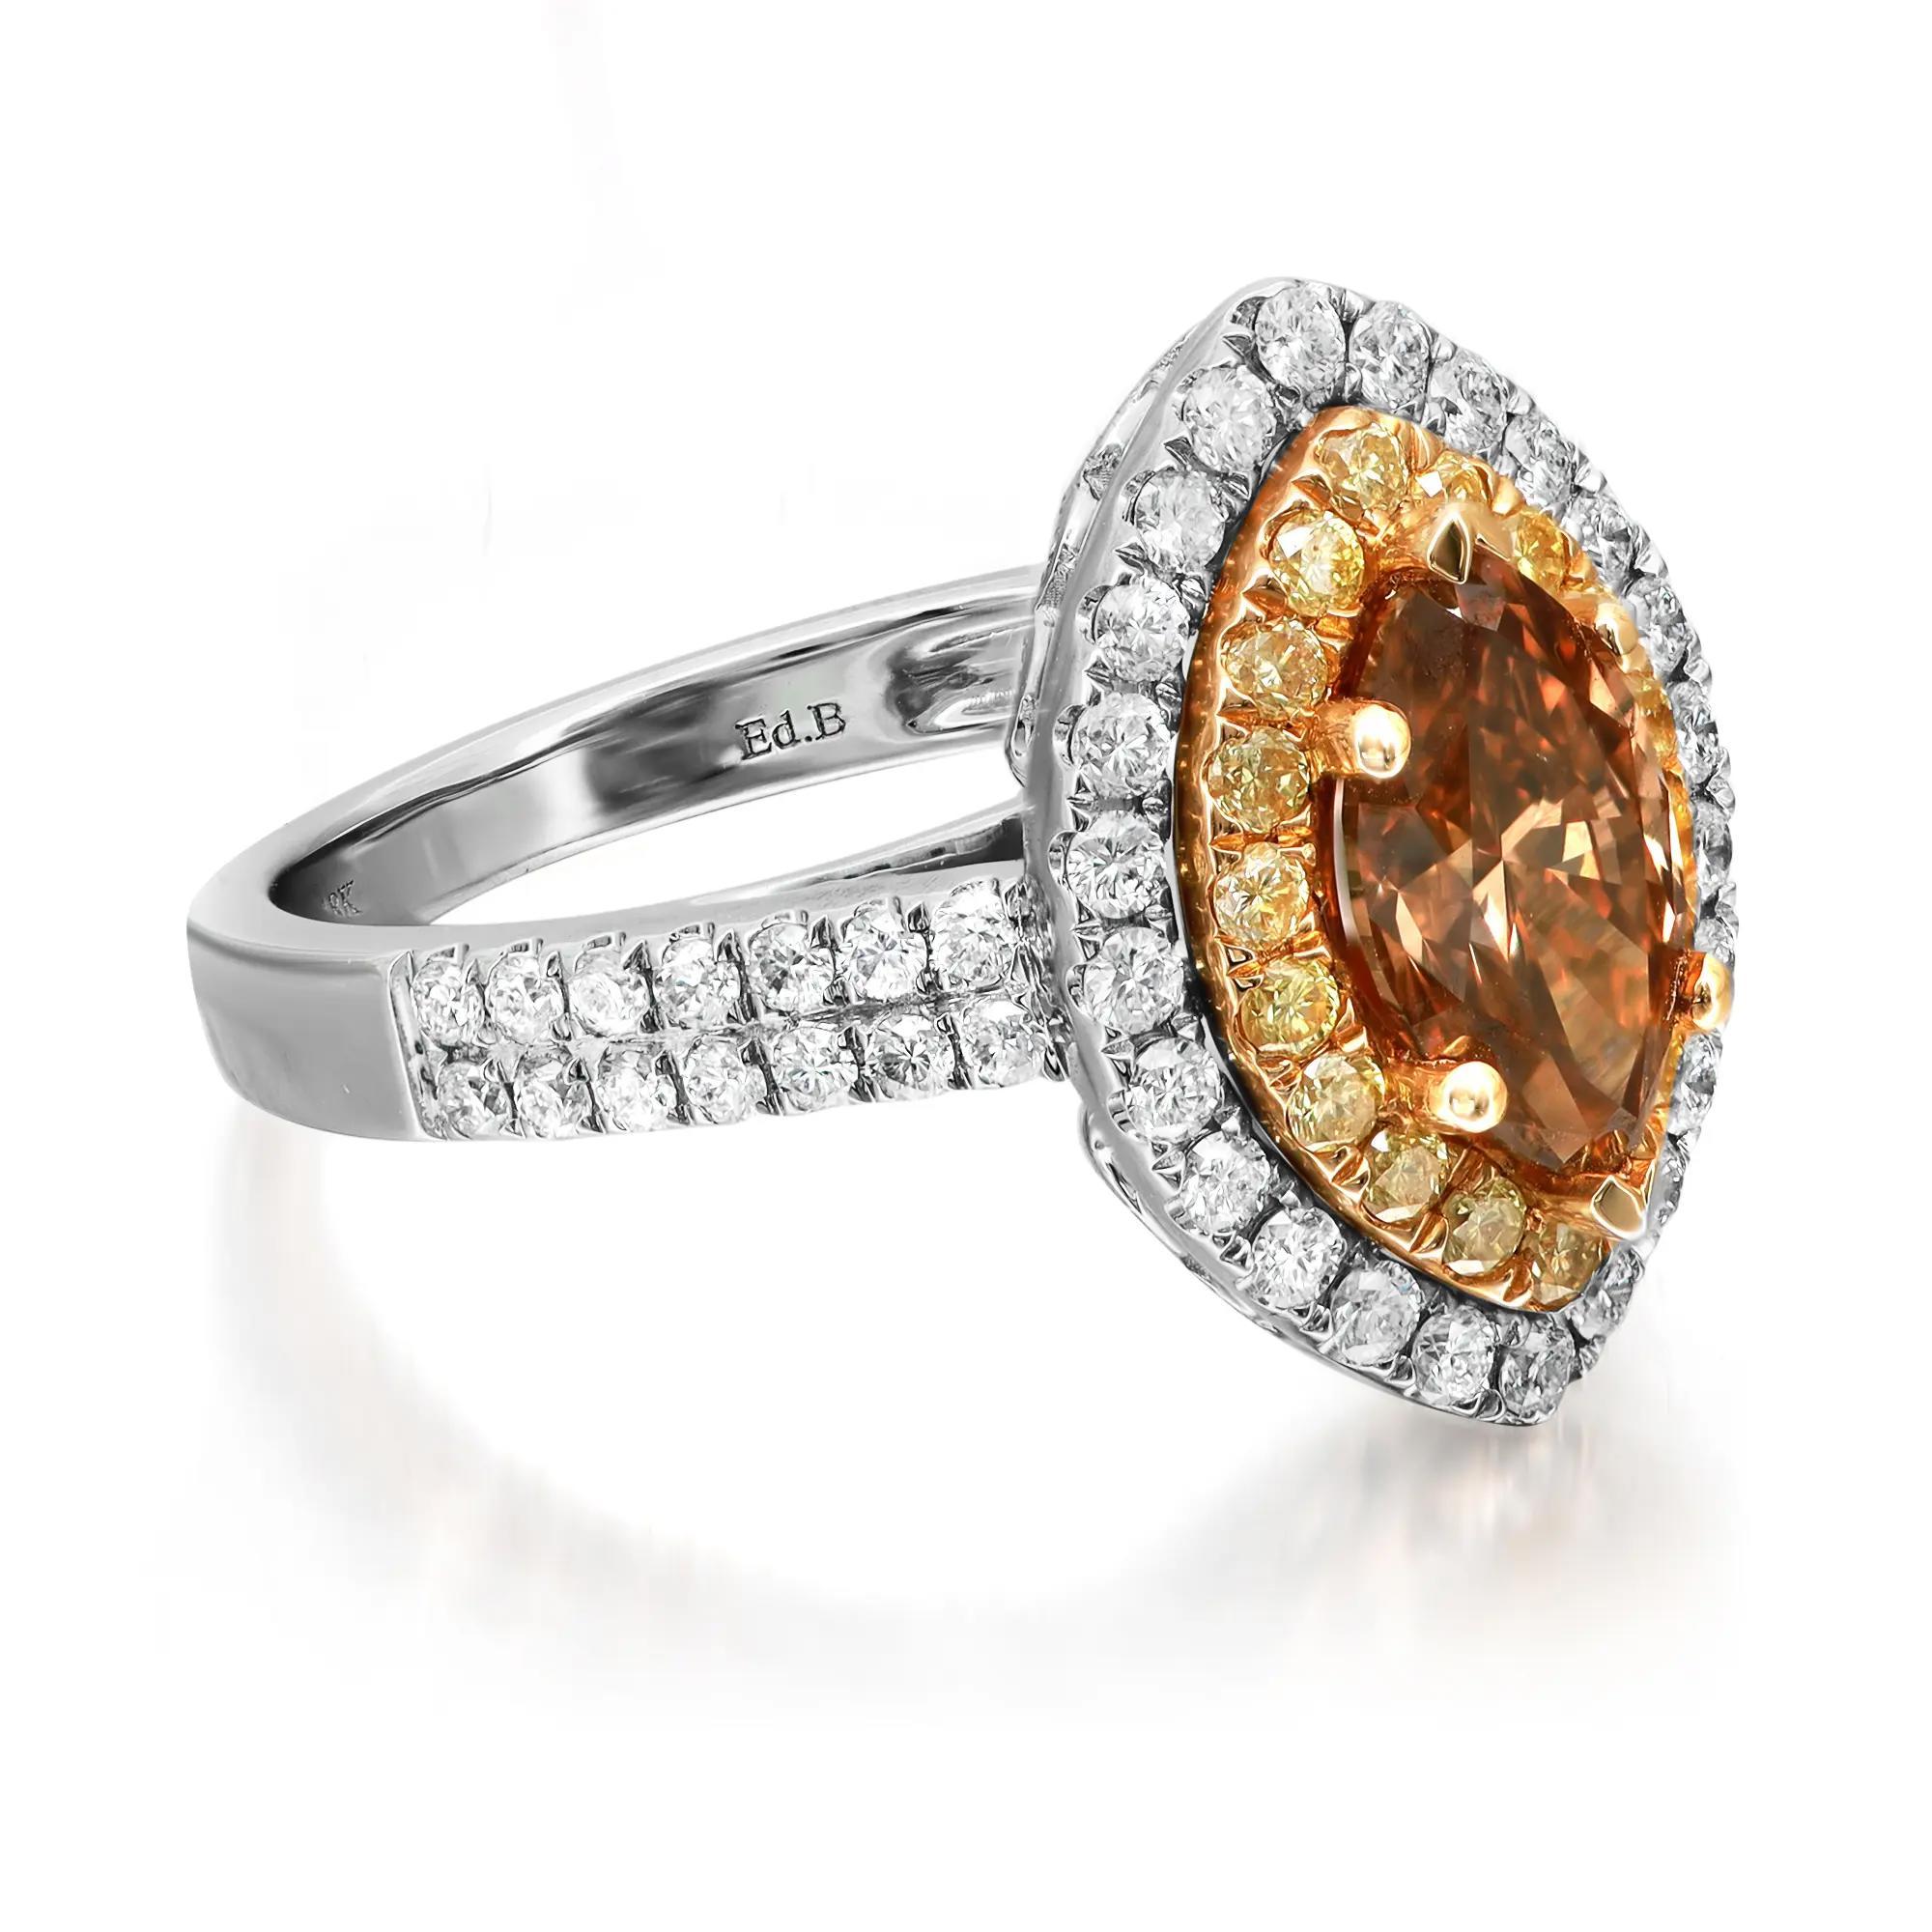 Magnificent ladies cocktail ring. This ring is centered by a beautiful prong set marquise shaped brown diamond. Accentuated with round cut yellow and white diamonds in a halo setting with round diamonds on band shoulders. Mounted in fine 18k white